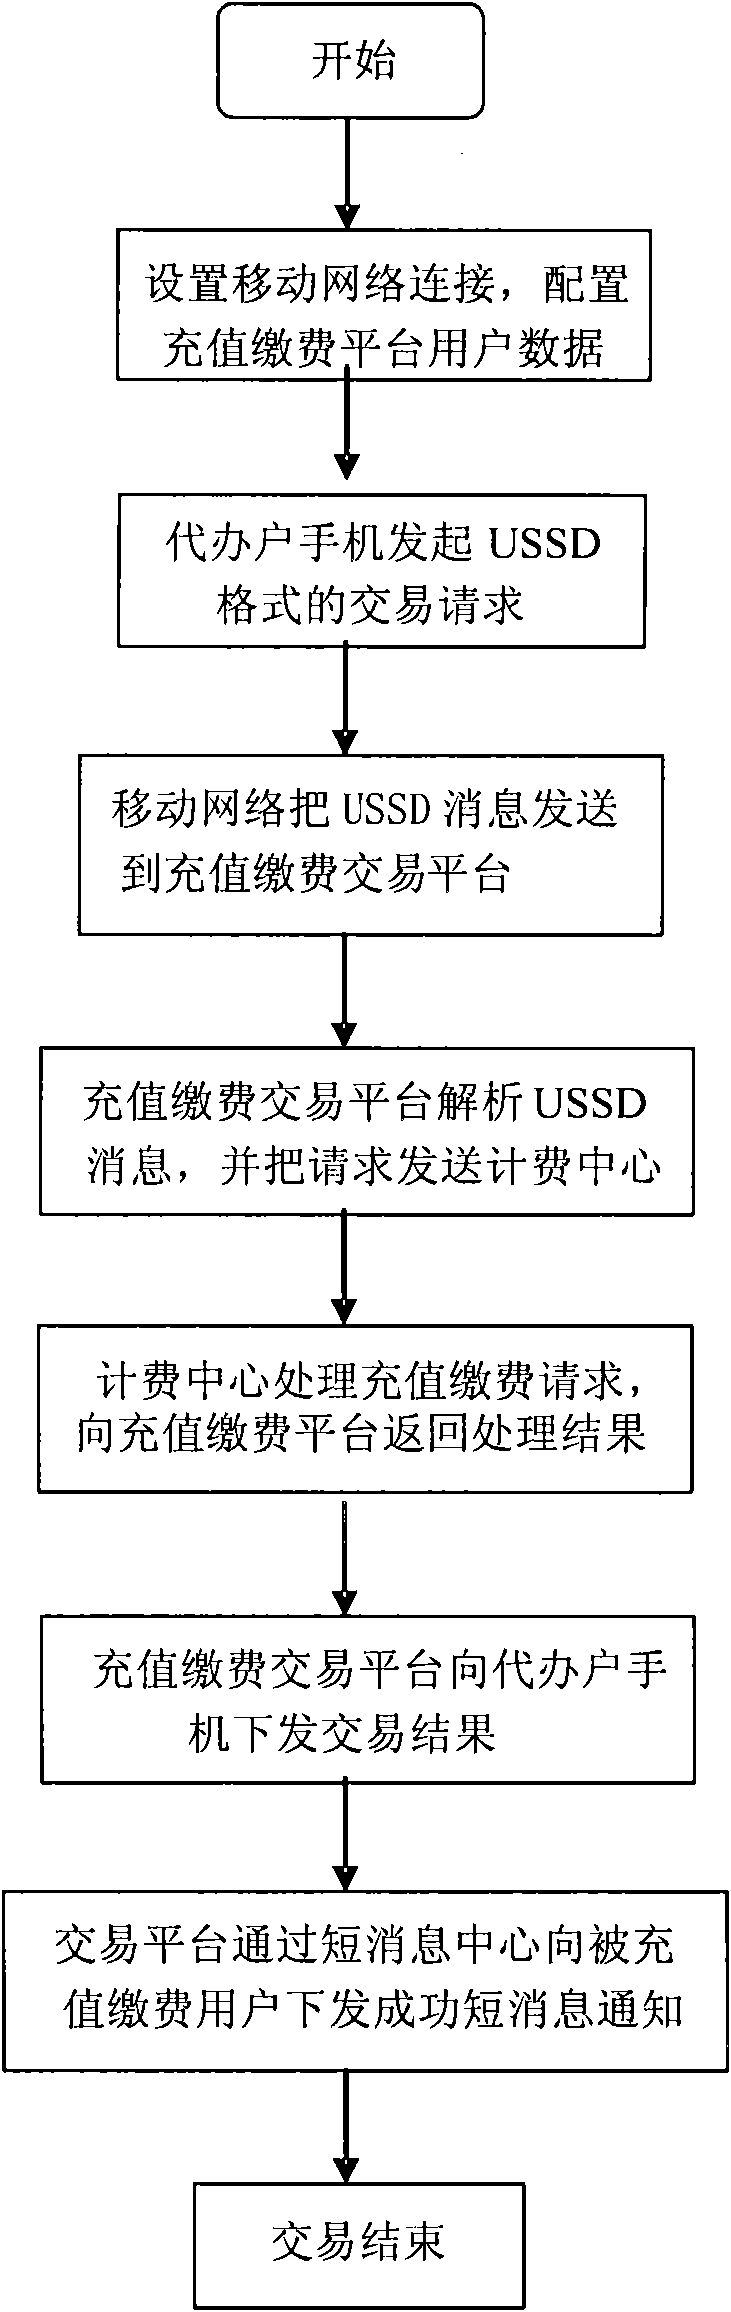 Recharging and paying method based on unstructured supplementary service data (USSD) and recharging and paying platform